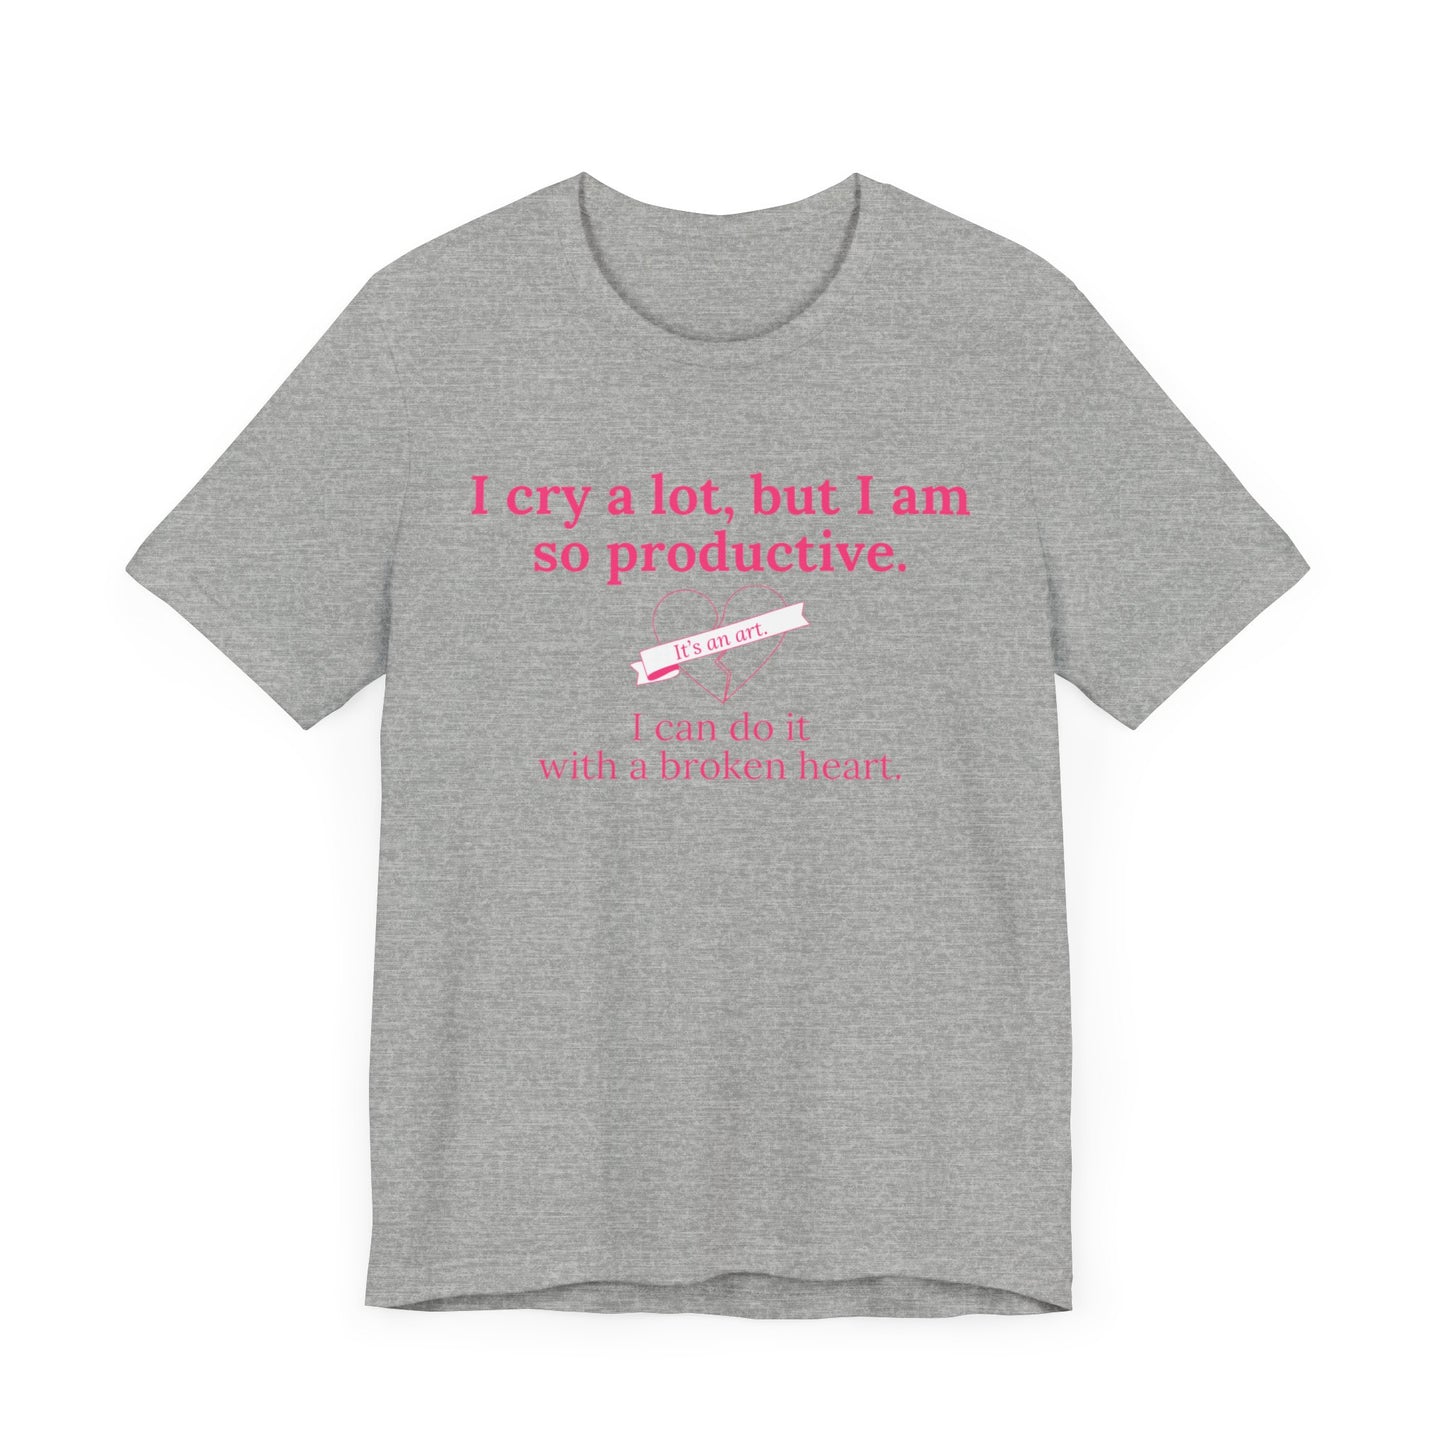 I Can Do It With a Broken Heart T-Shirt